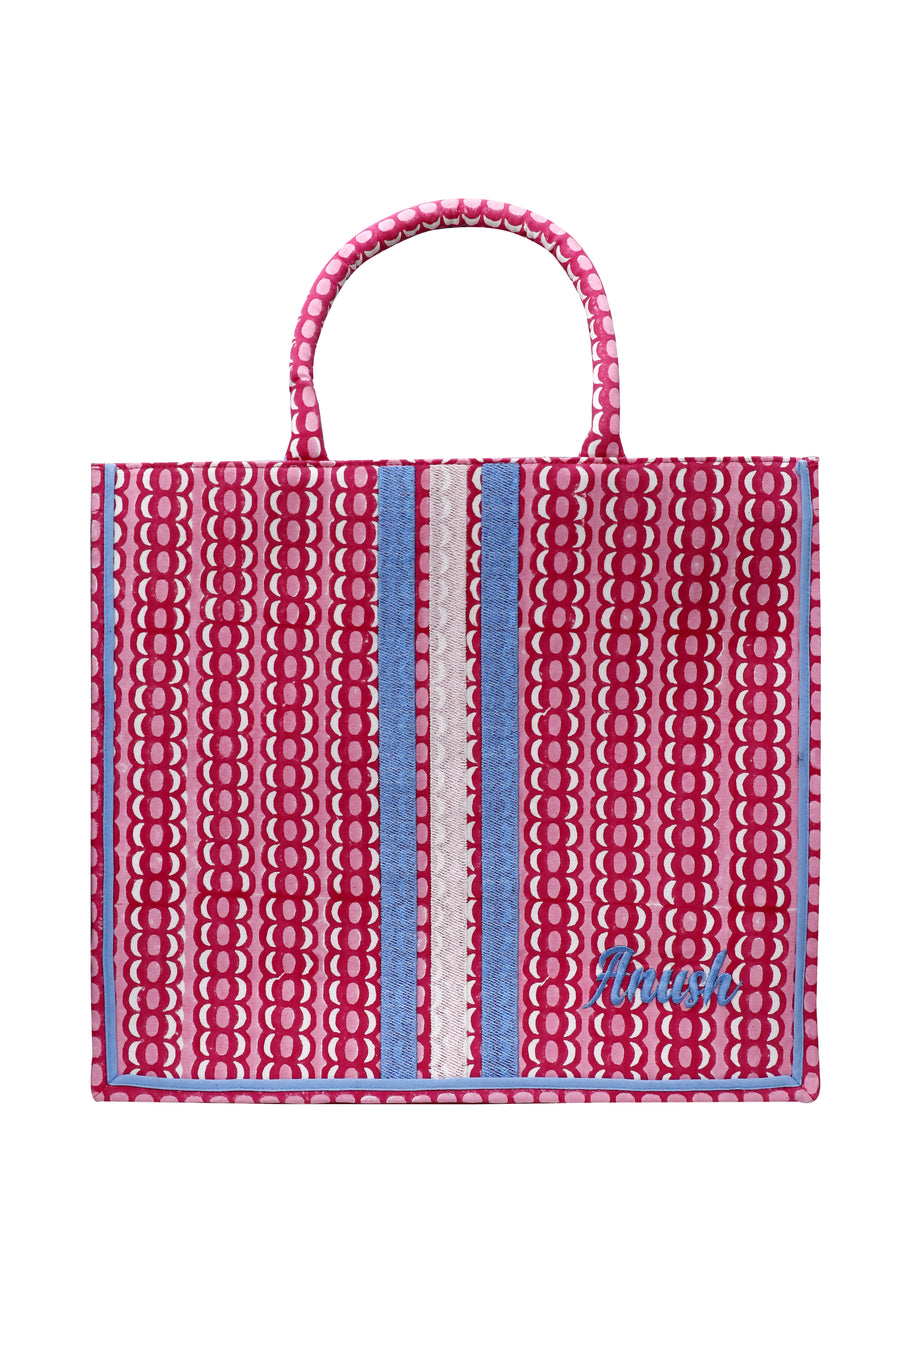 Sample ANUSH EMBROIDERY AND STRIPES Tote